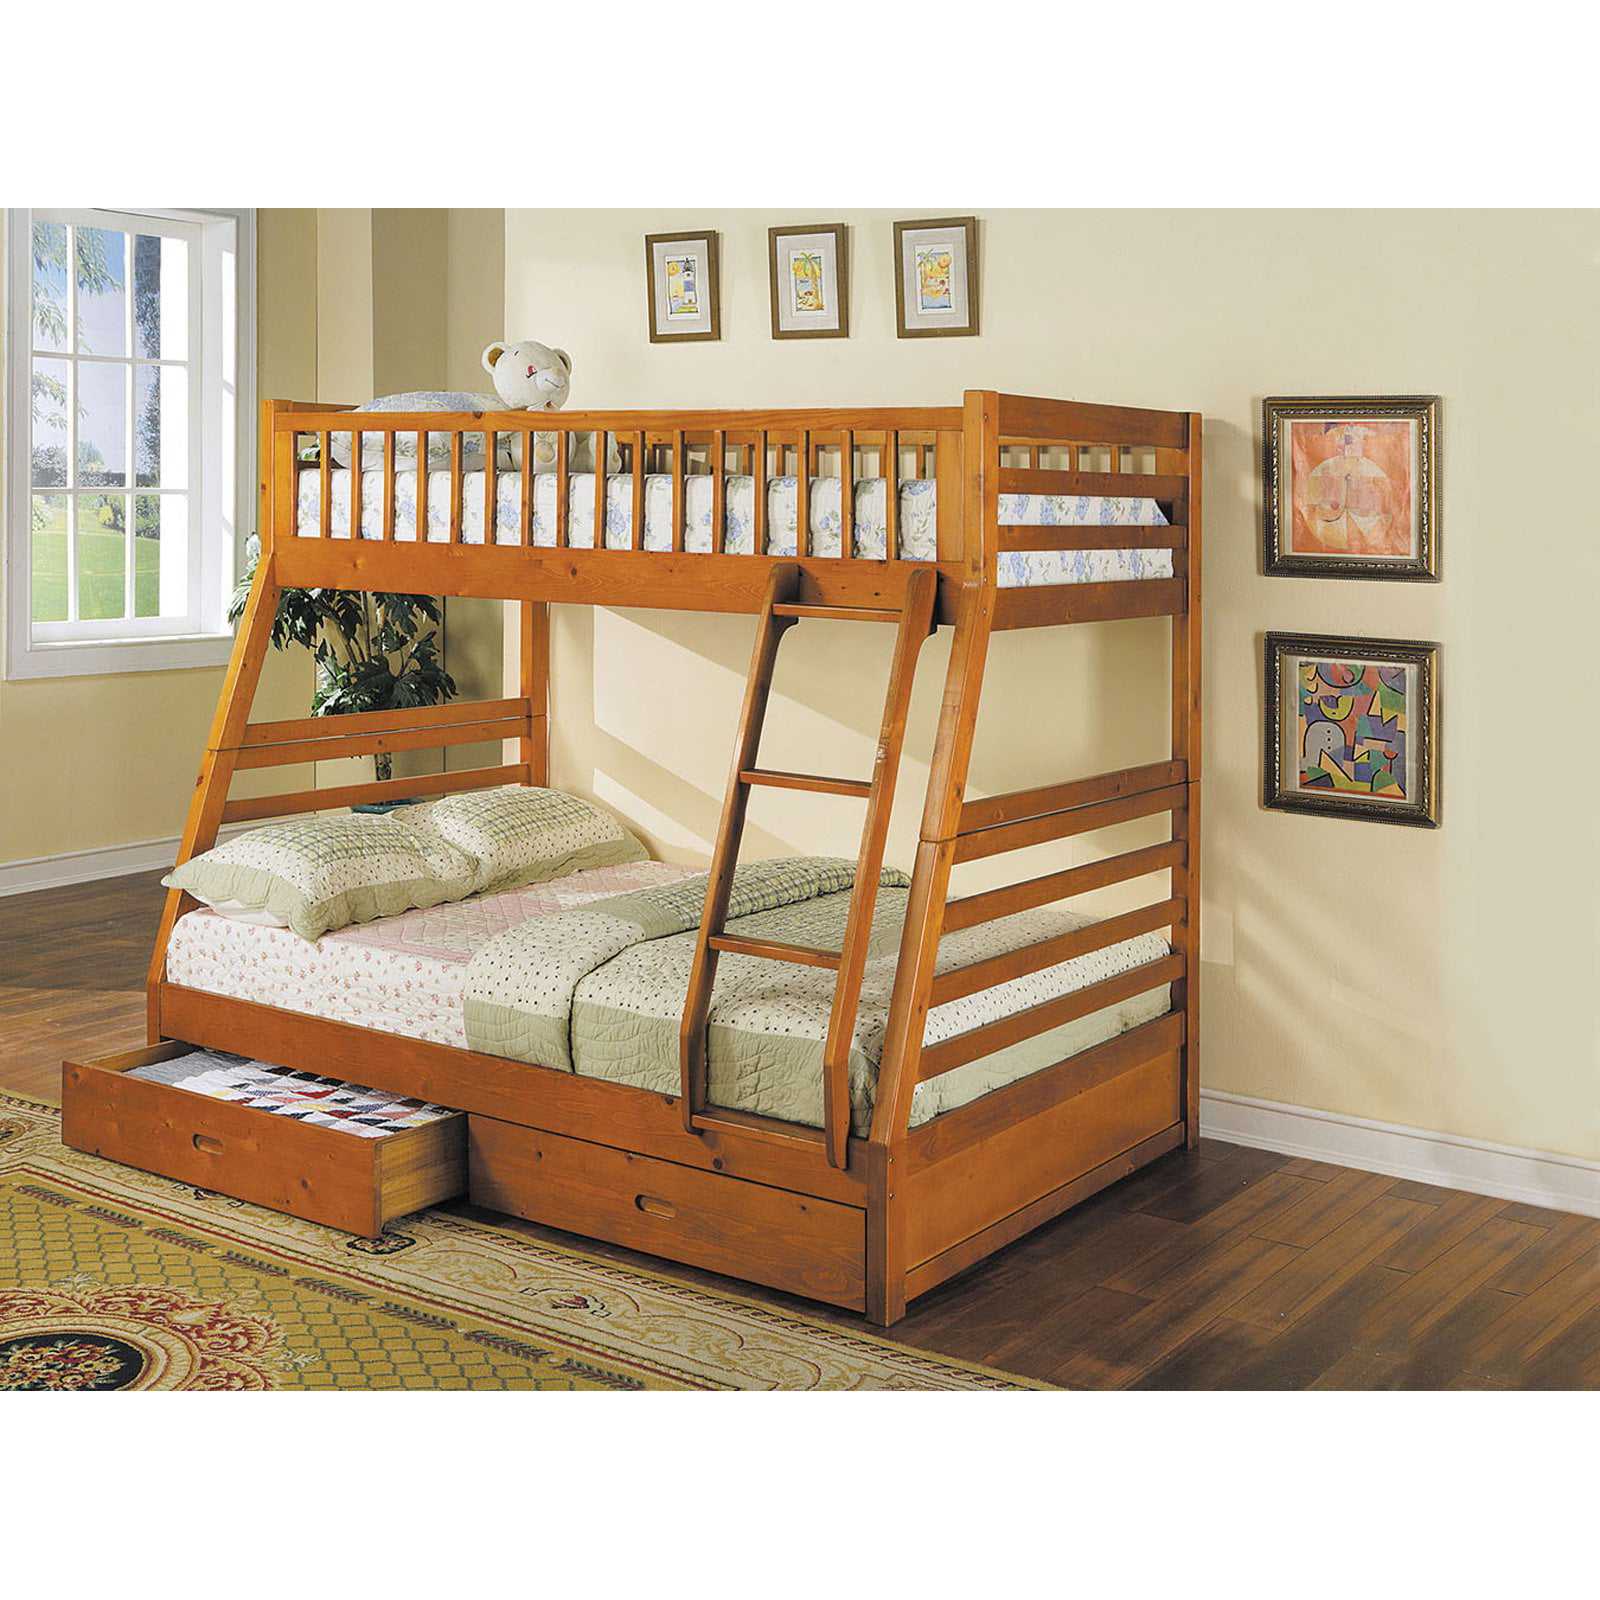 Acme Jason Twin Over Full Bunk Bed, Acme Furniture Jason Twin Over Full Bunk Bed Espresso